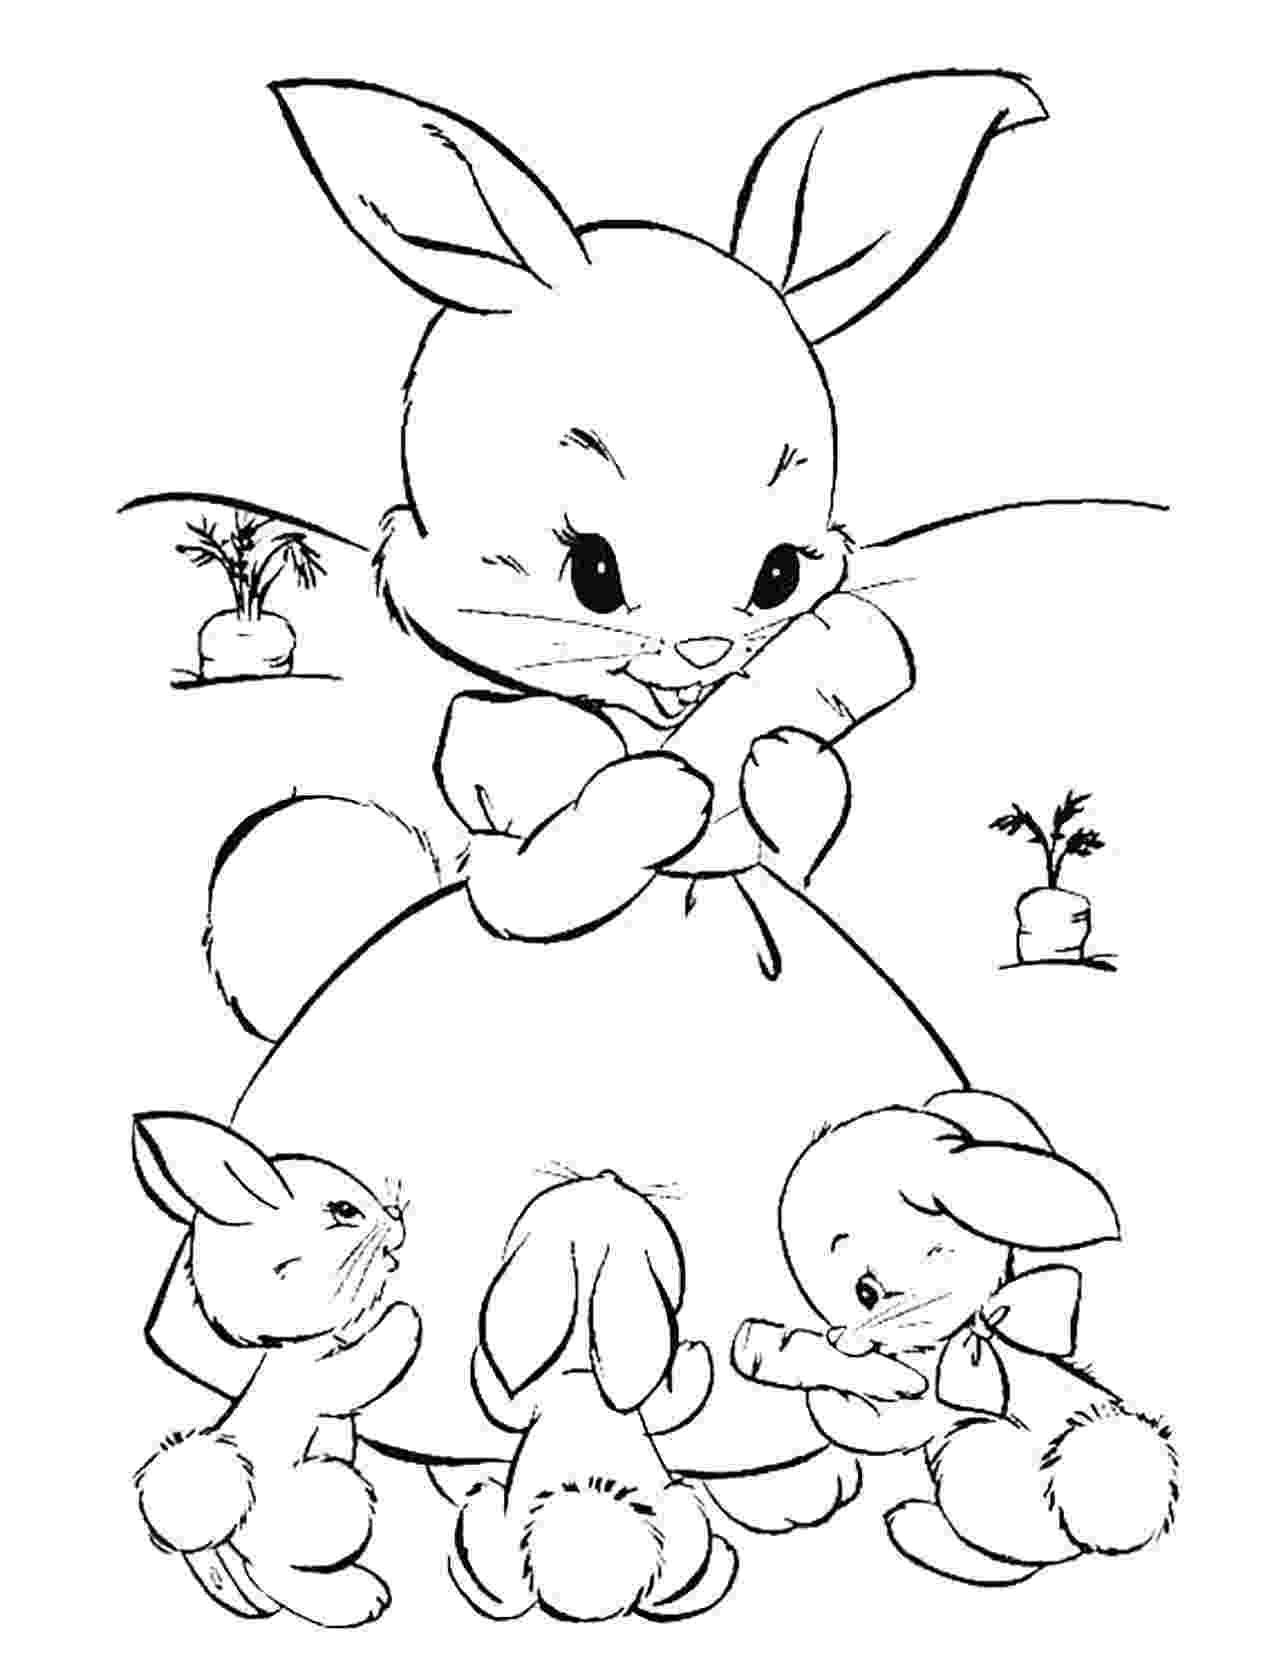 images of rabbits to color rabbit free to color for children rabbit kids coloring pages of color images to rabbits 